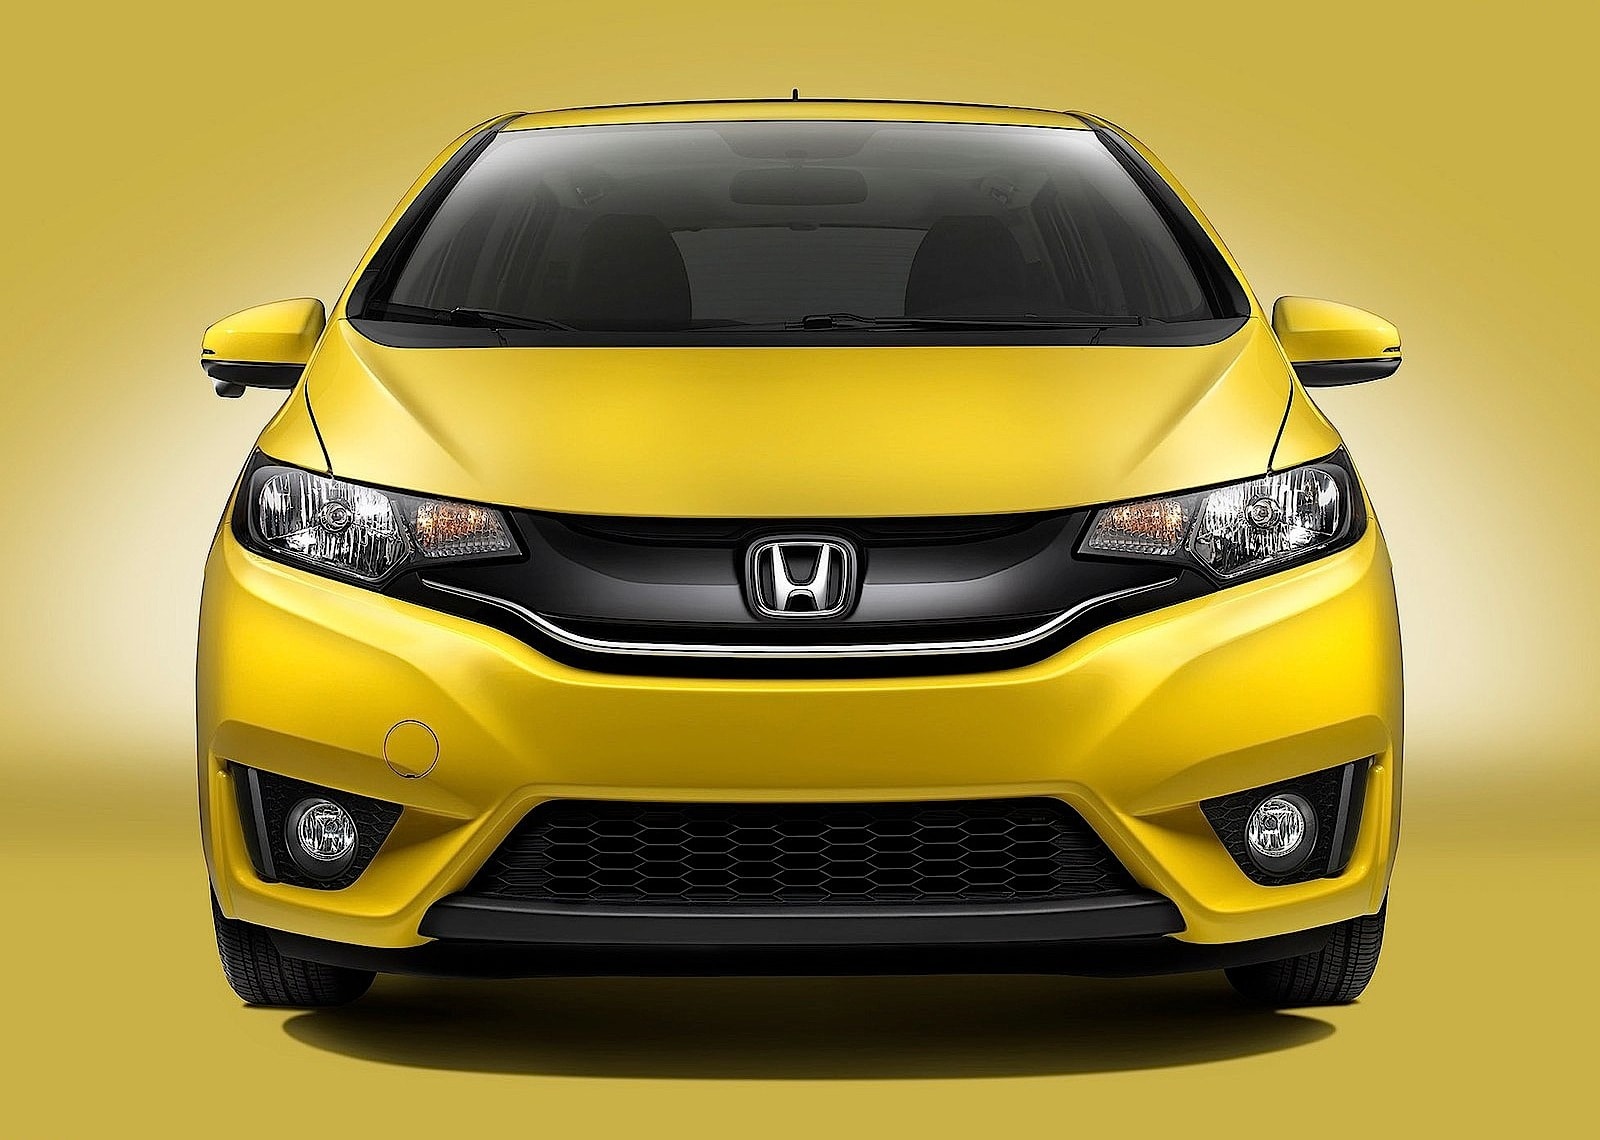  Honda  Fit  Jazz and City Getting 1 0 Turbo Three Cylinder 